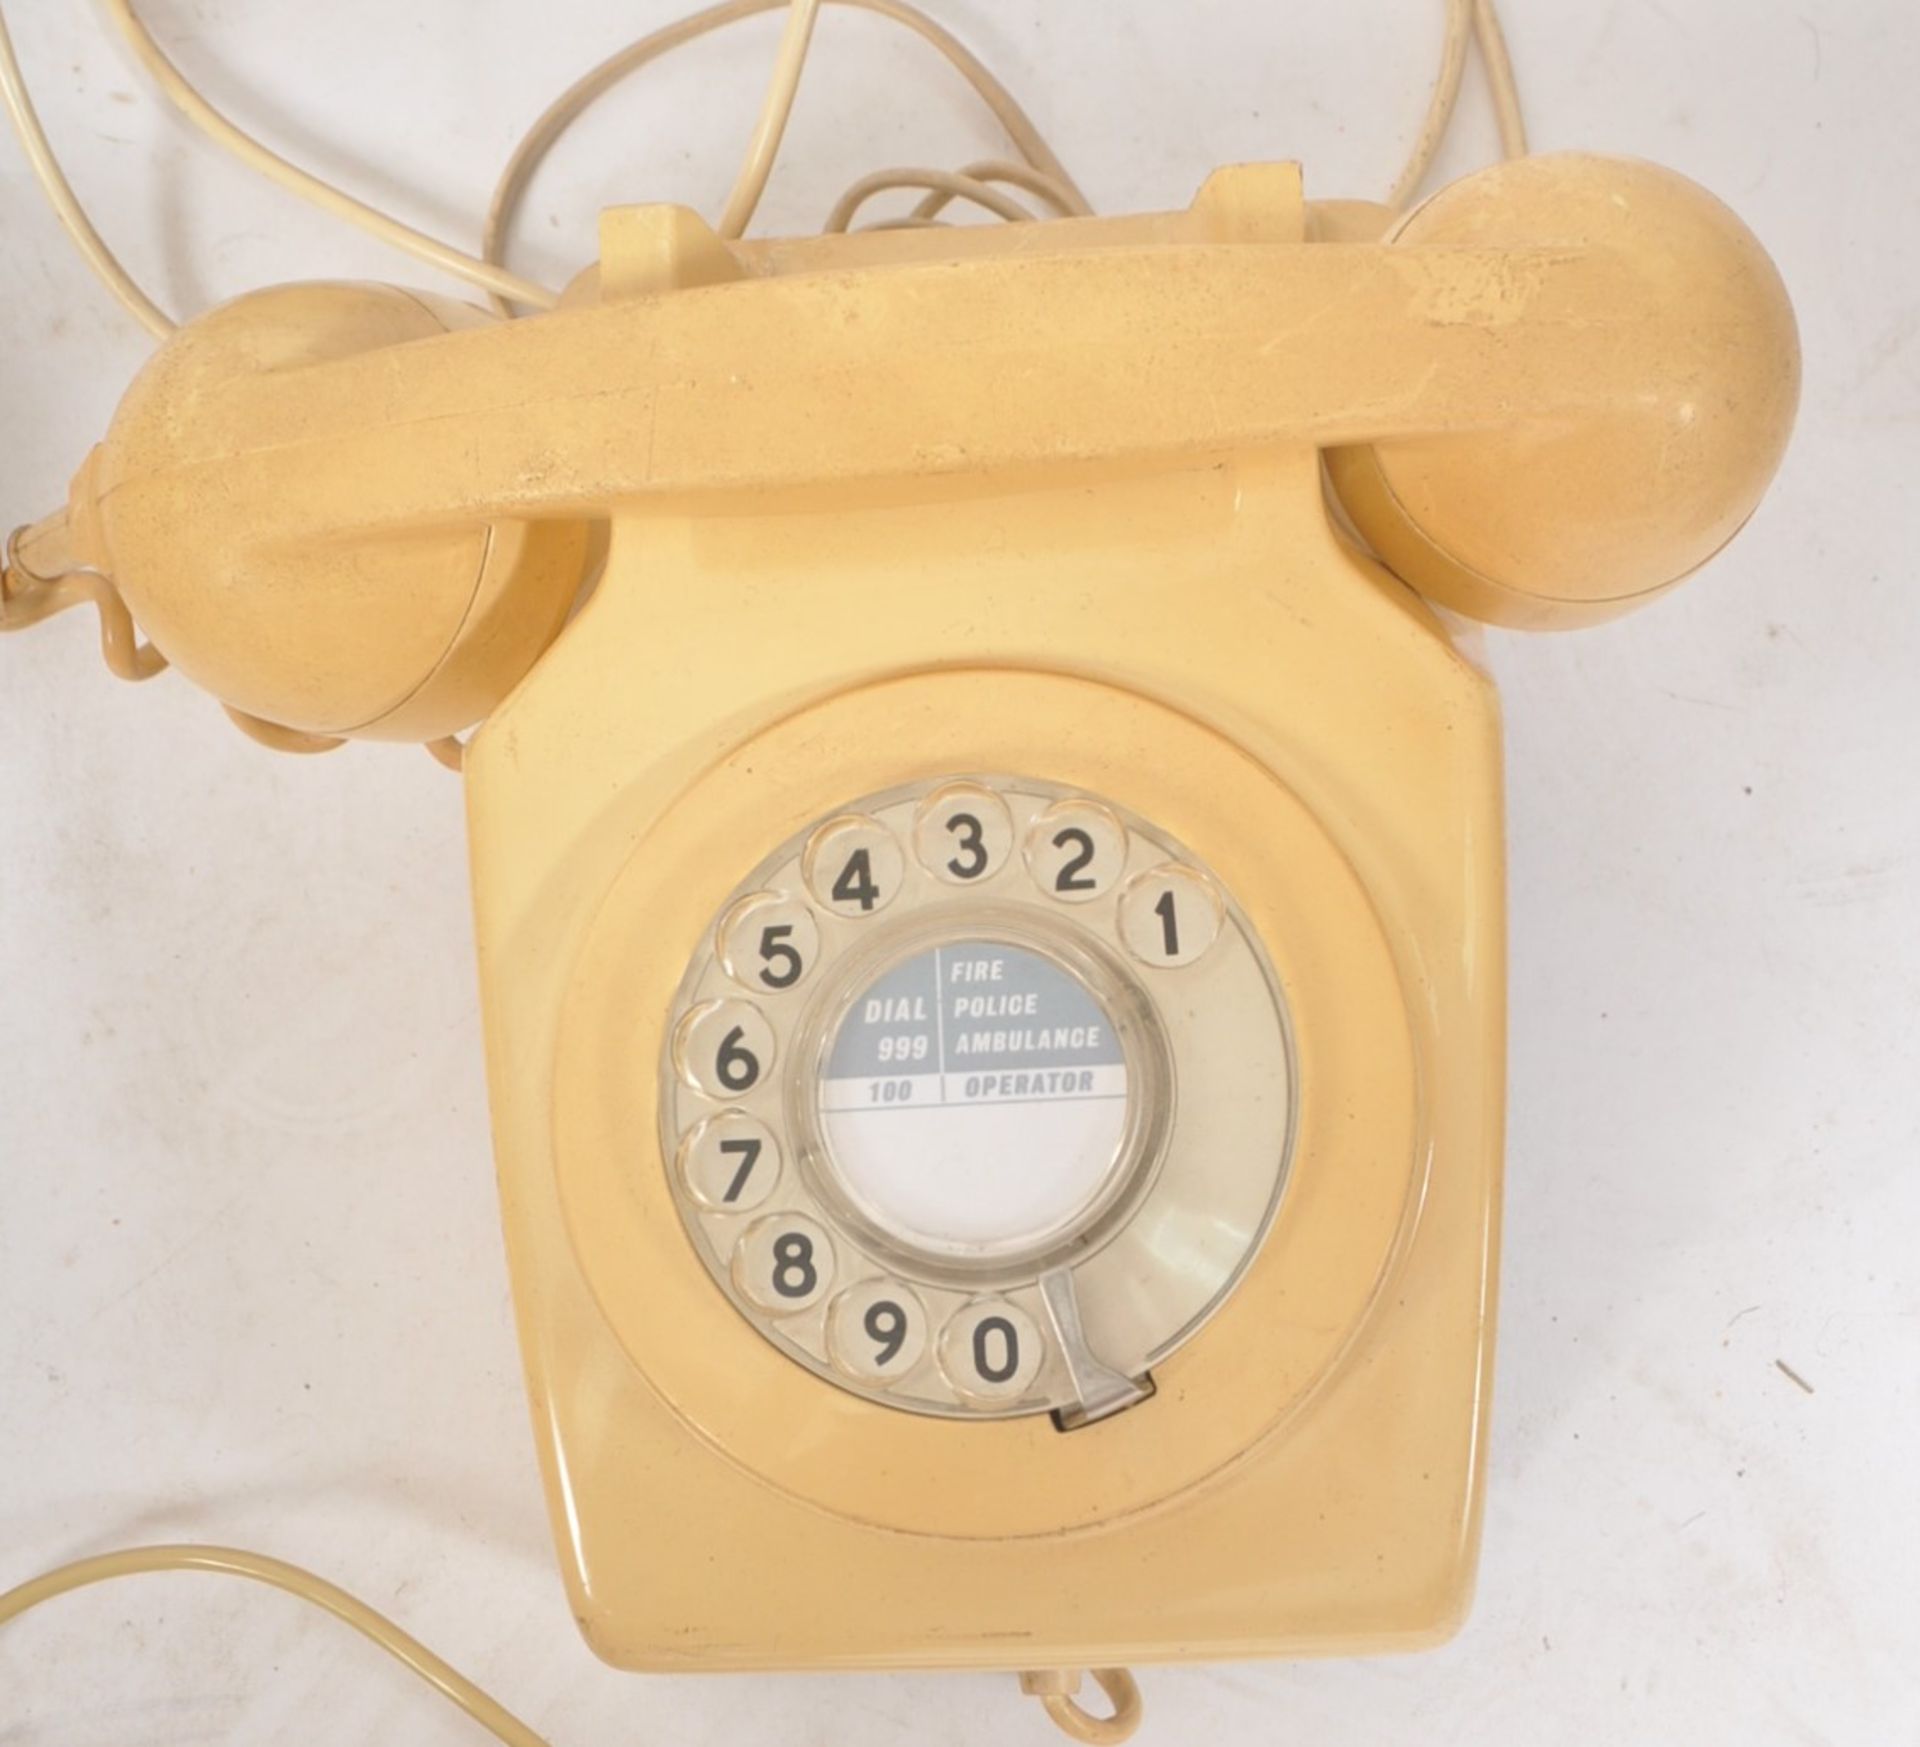 COLLECTION OF EIGHT VINTAGE 1970S ROTARY DIAL GPO TELEPHONES - Image 3 of 6